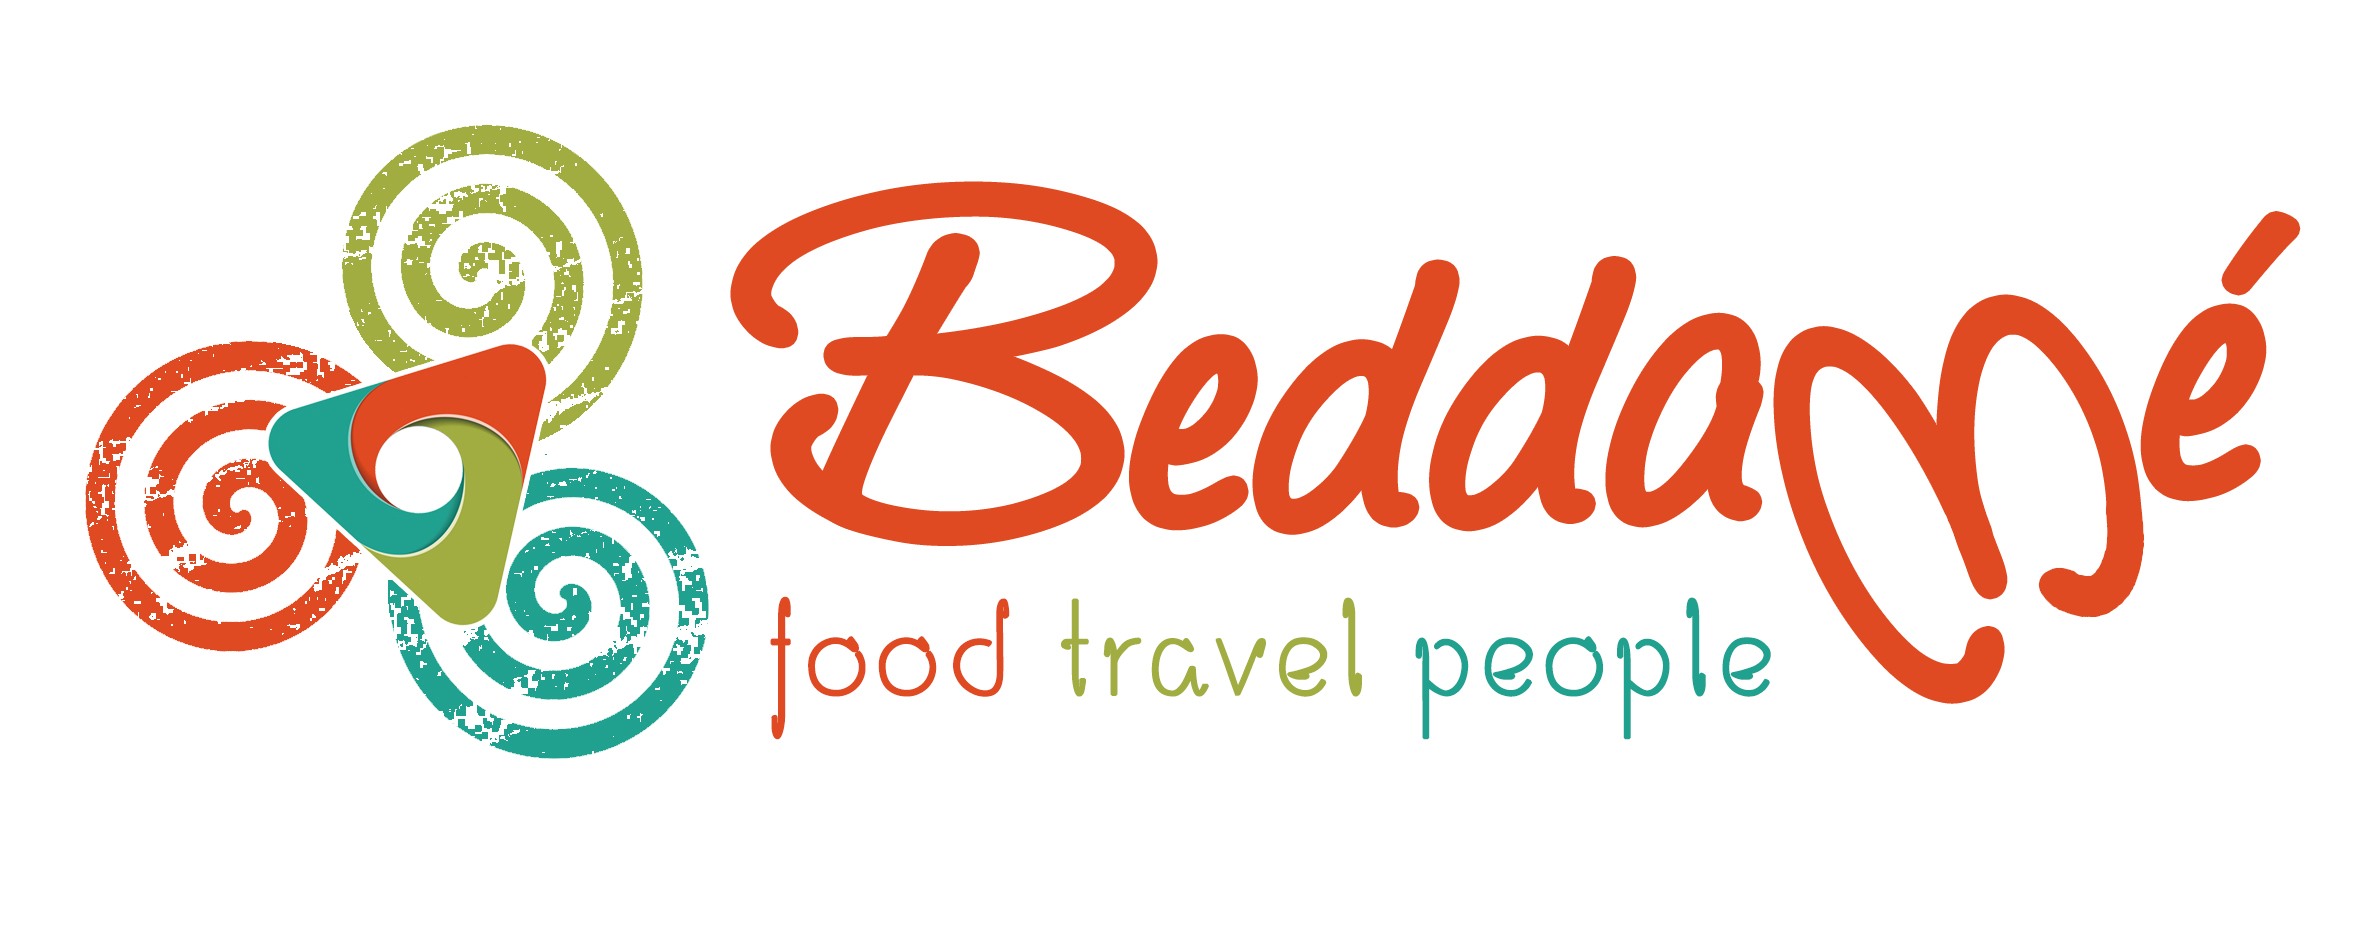 Beddamé – Food Travel People | Sicily Concept Space